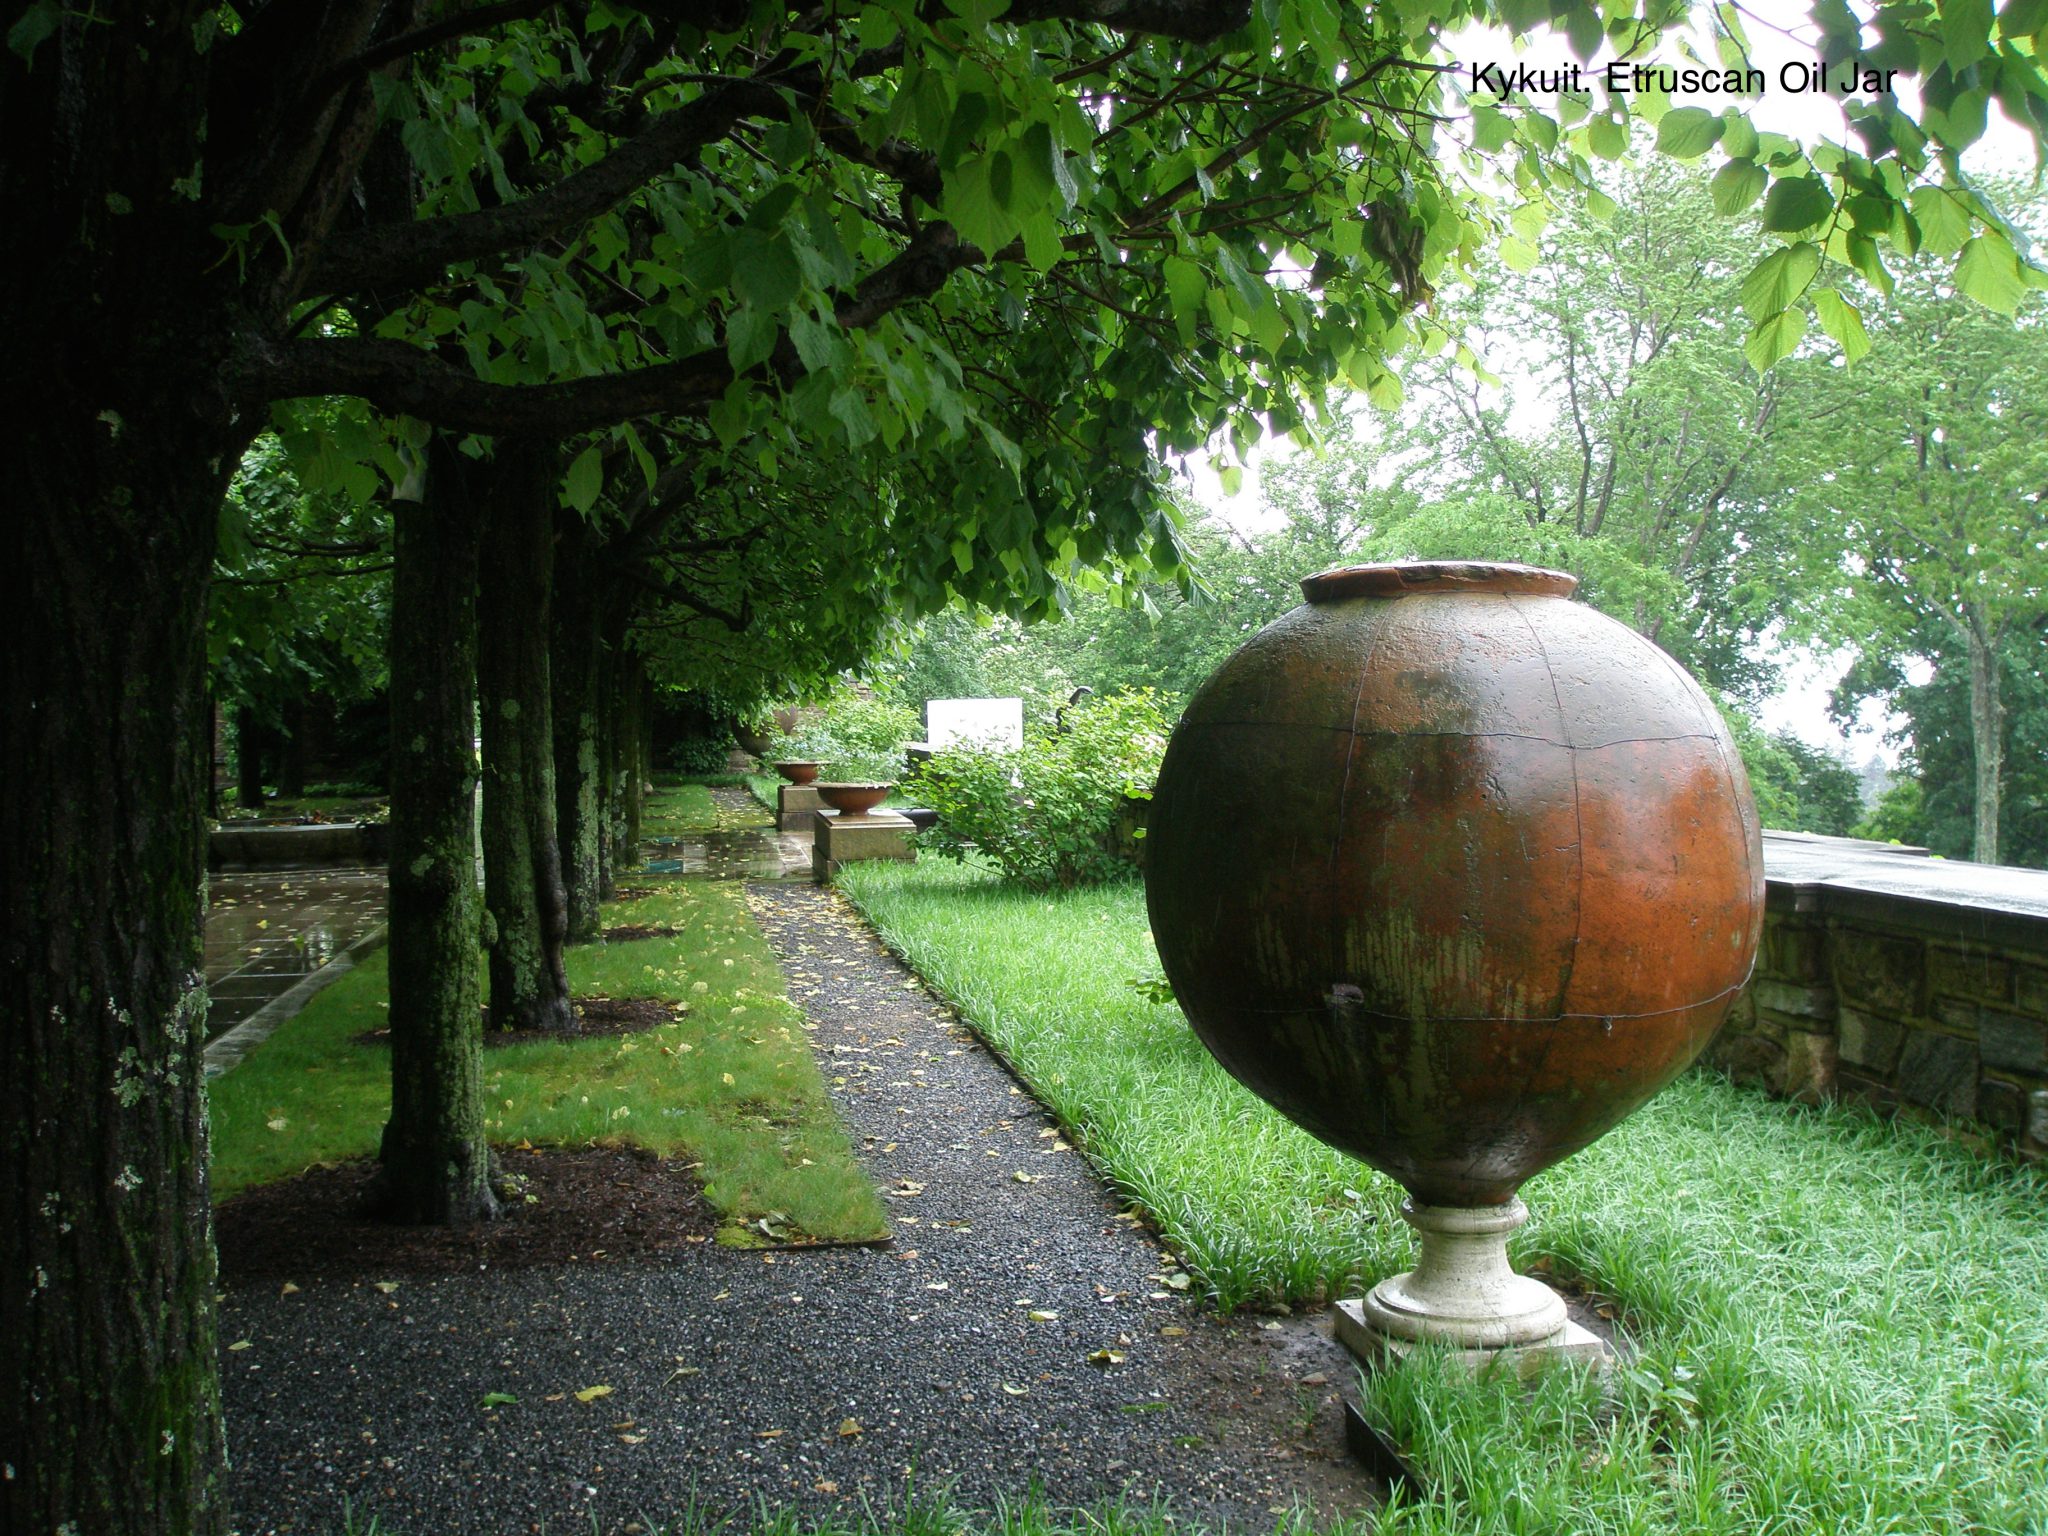 One of a pair of Giant Etruscan Urns, at the top of the West Garden